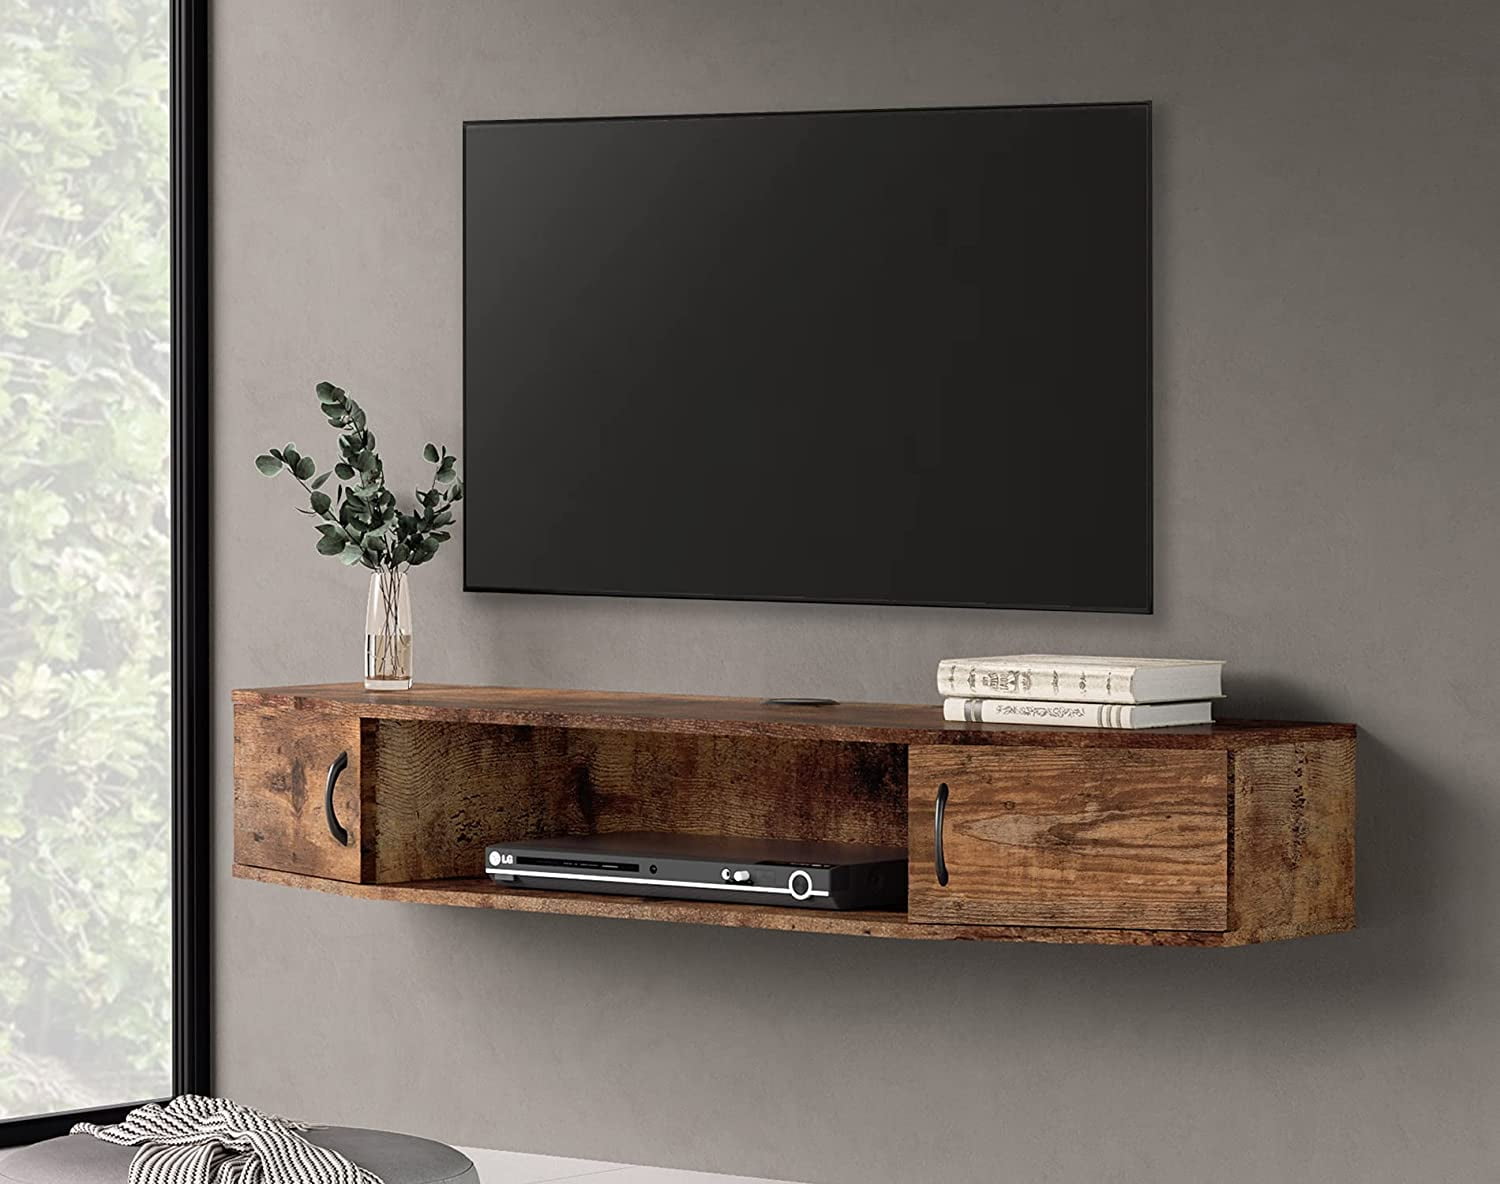 FITUEYES Floating TV Stand with Colorful LED Light, Wall Mounted TV ...